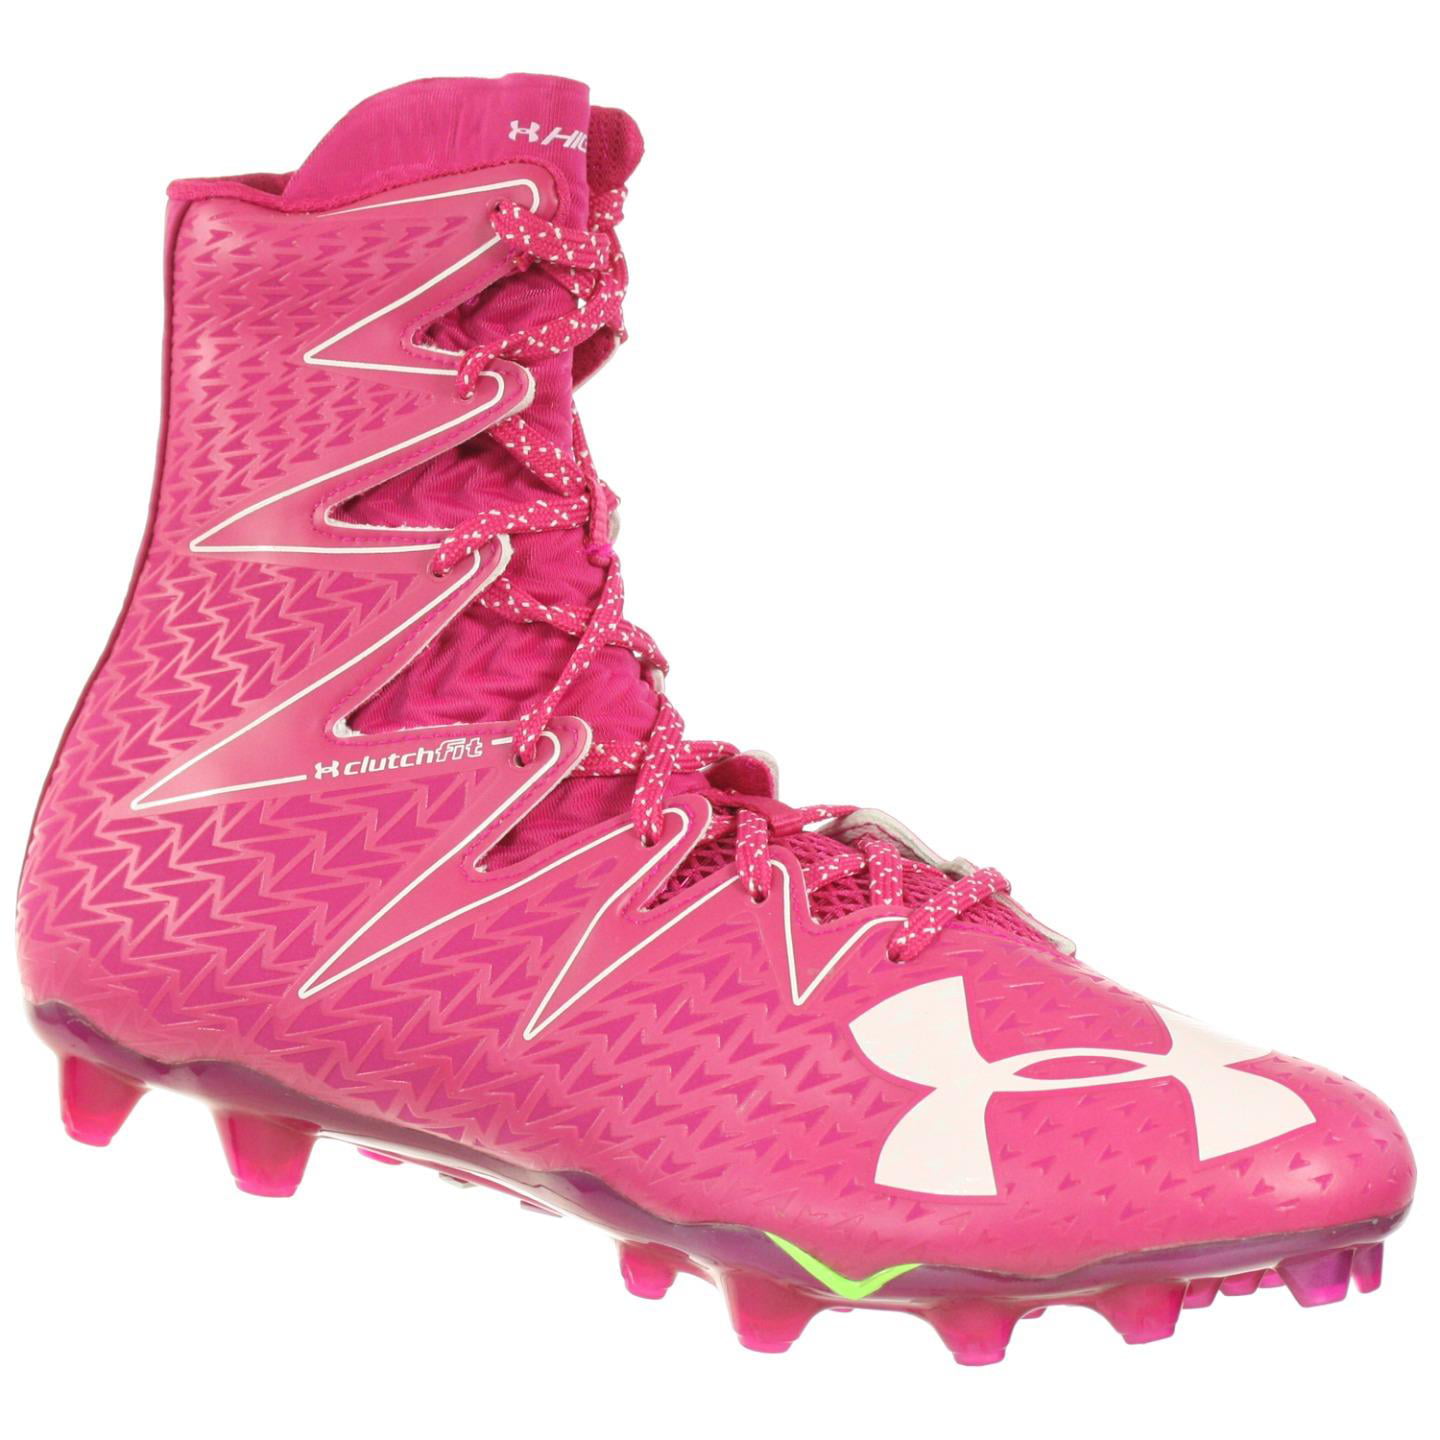 Under Armour Men's Football Cleats 